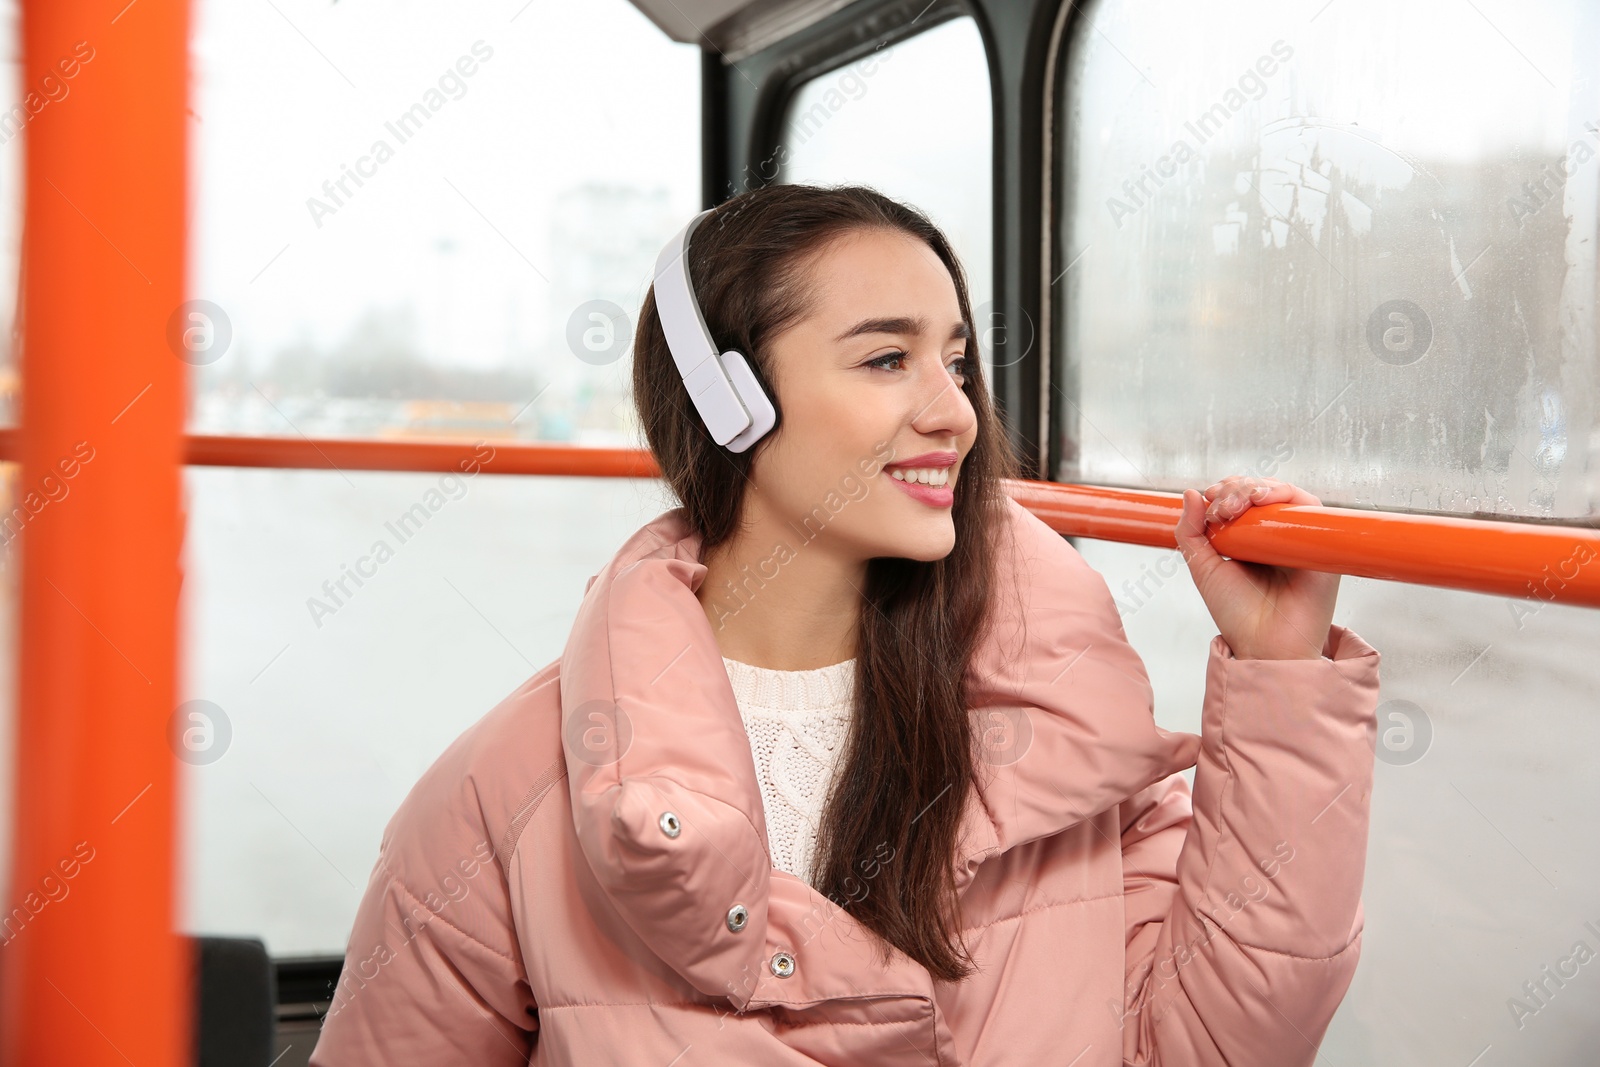 Photo of Beautiful young woman listening to music with headphones in public transport